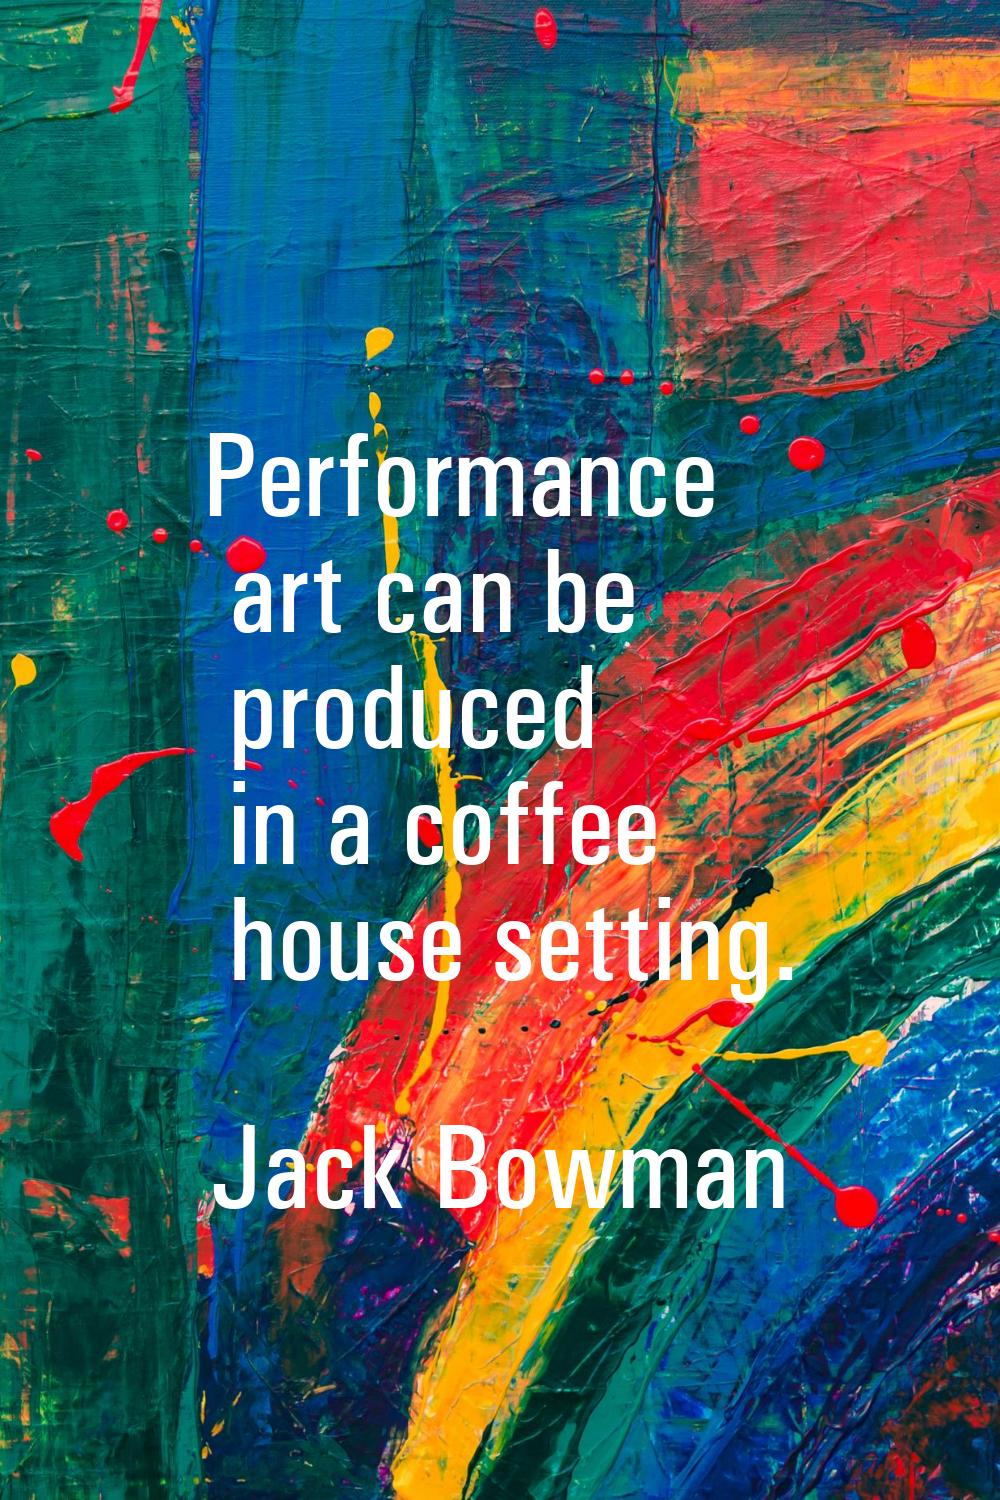 Performance art can be produced in a coffee house setting.